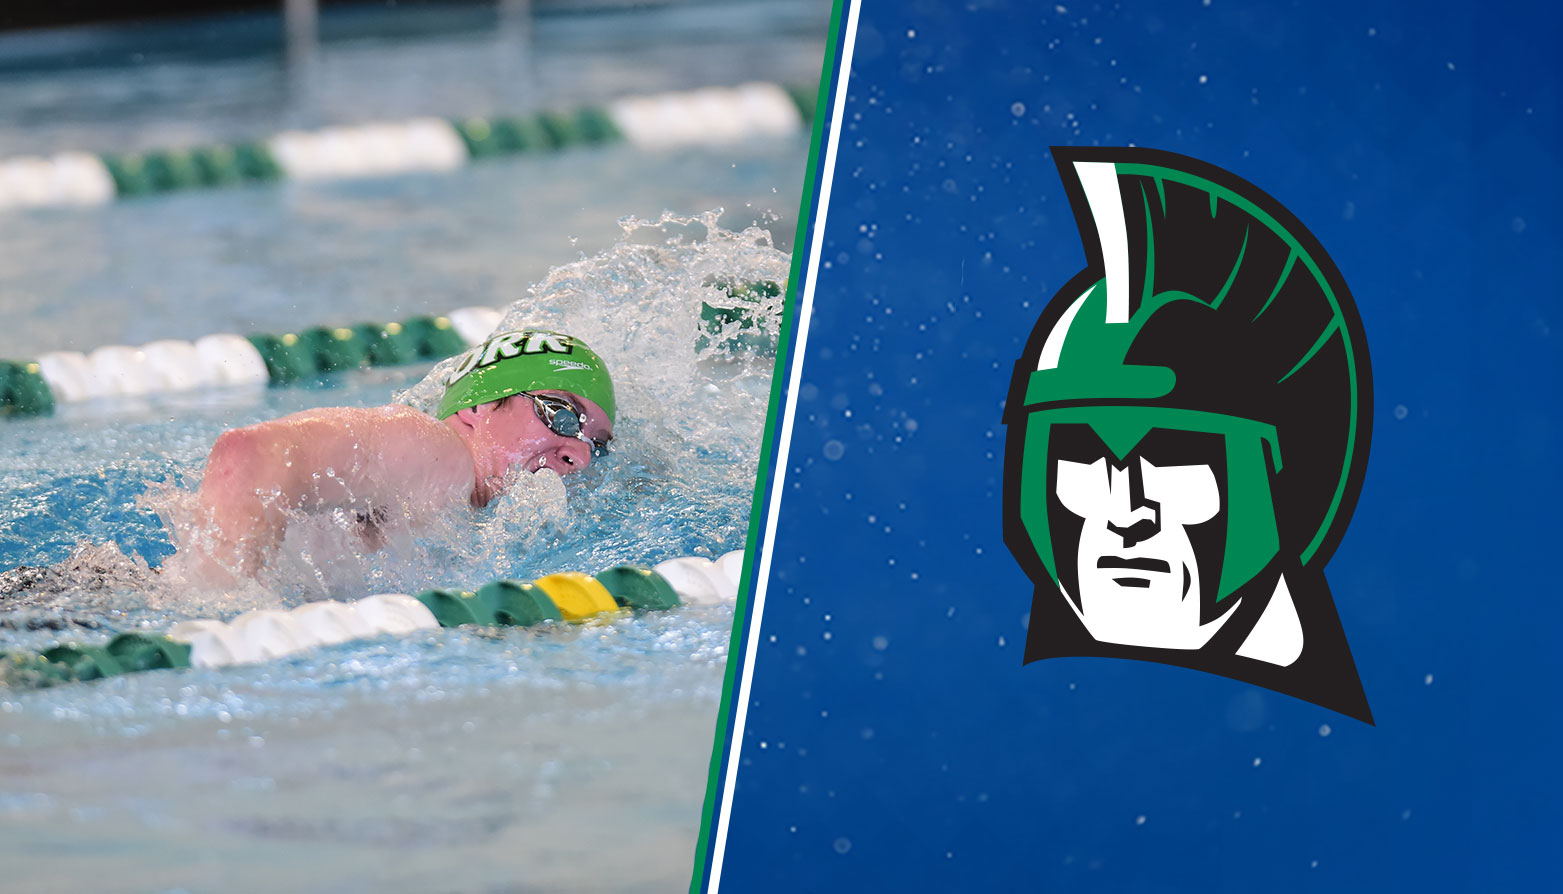 York's Keven Stahl Selected CAC Men's Swimmer of the Week for Third Consecutive Week